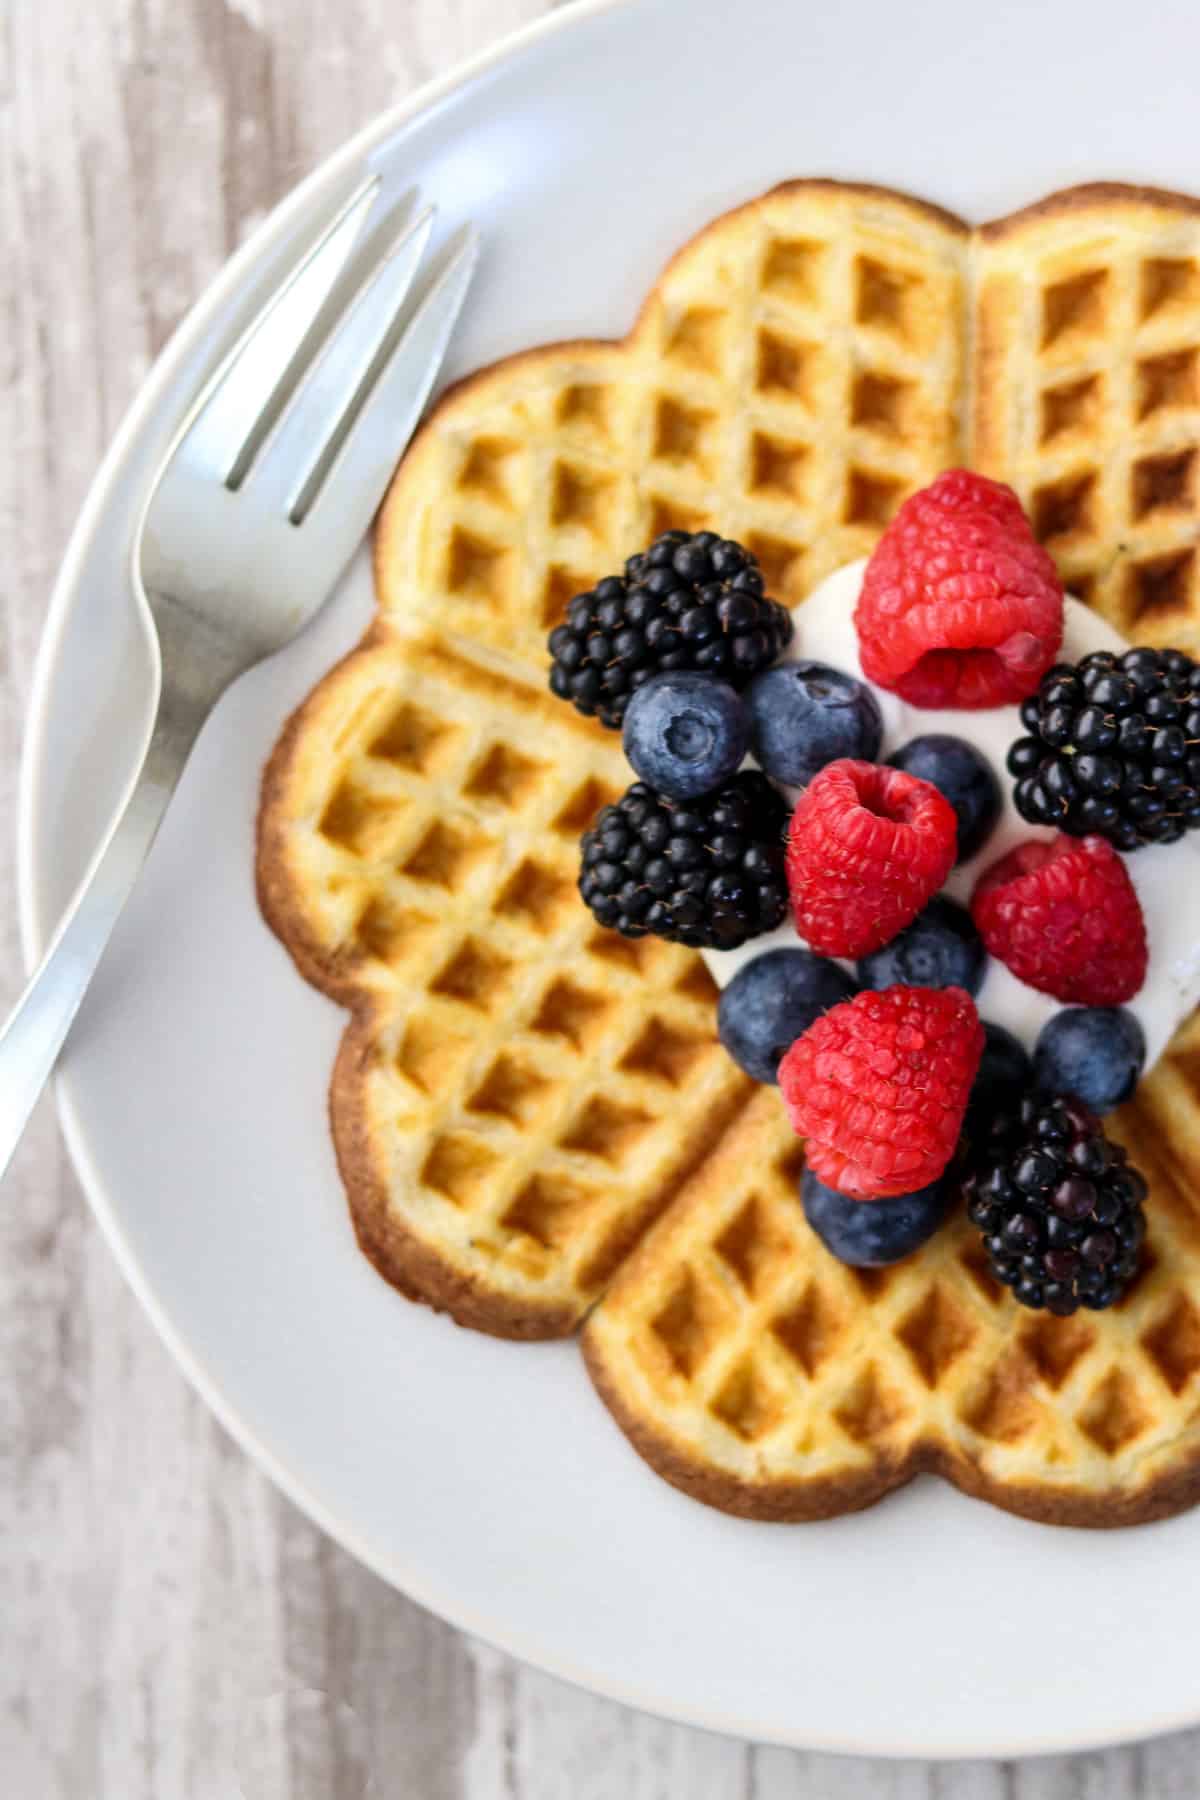 Heart-shaped waffle on a plate topped with whipped cream and fruit.